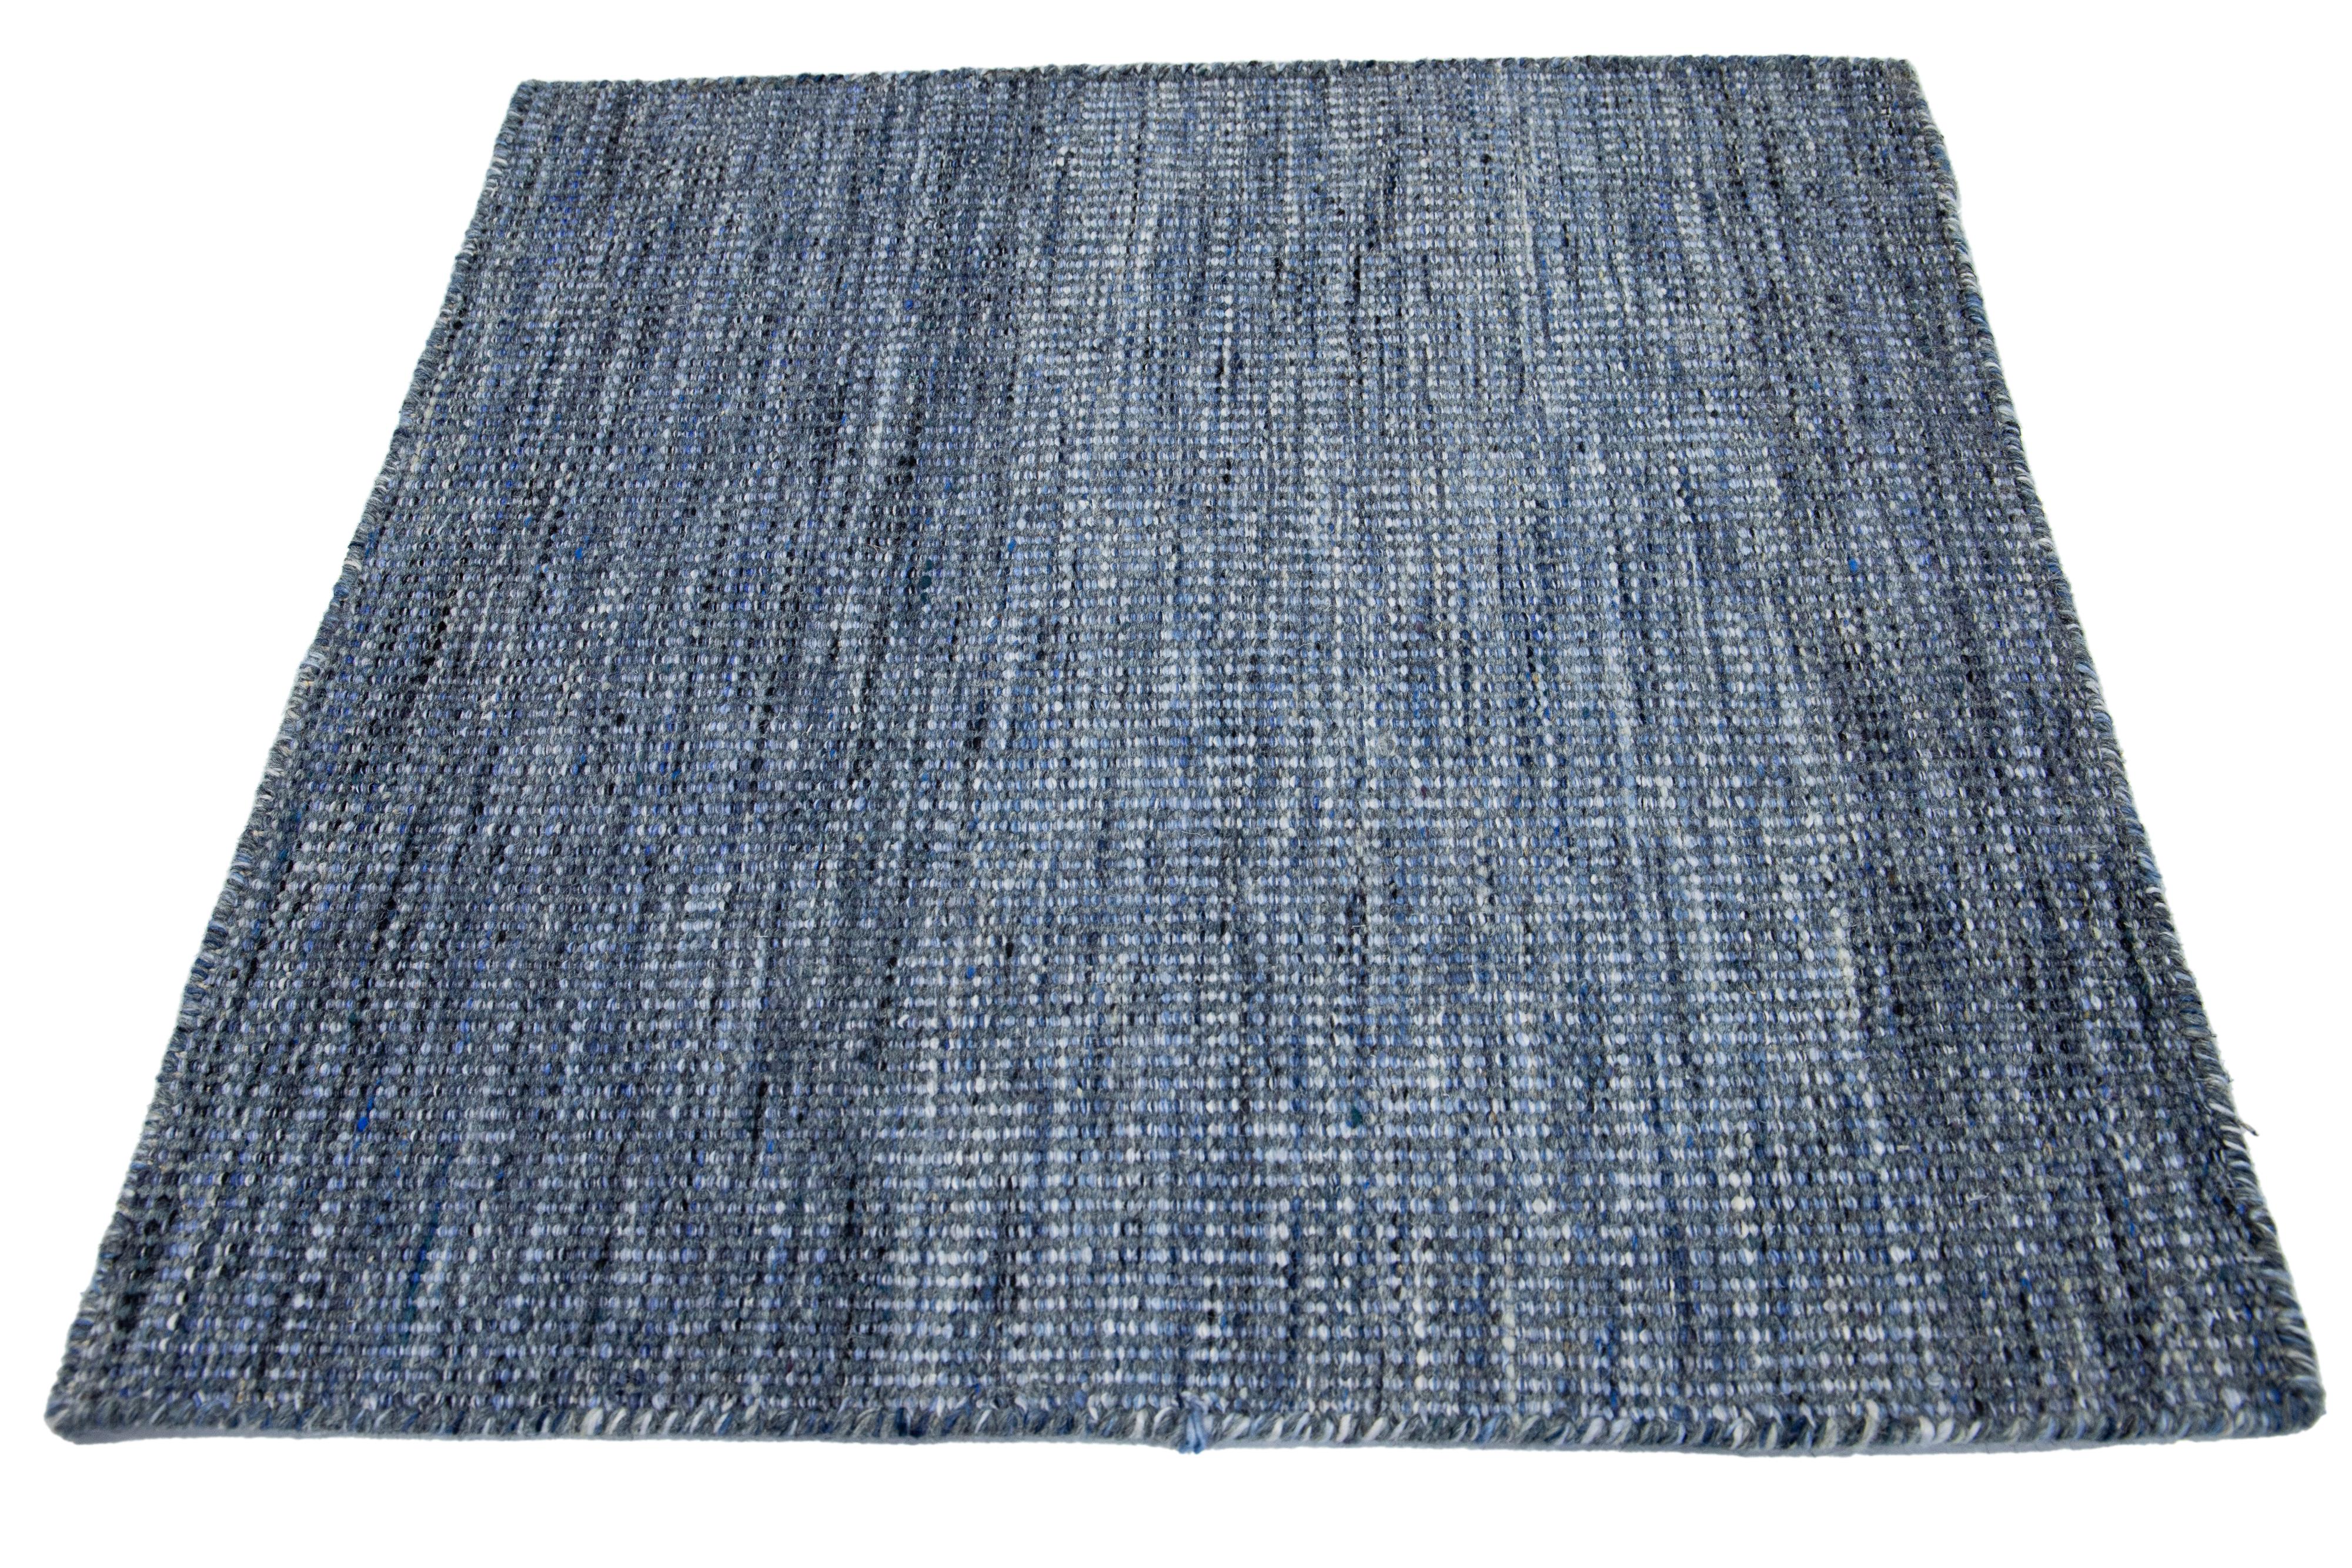 Apadana's Kilim Flatweave wool custom rug. Custom sizes and colors made-to-order.

Material: Wool.
Techniques: Flatweave.
Style: Solid-Coastal.
Lead time: Approx. 15-16 weeks available.
Colors: As shown, other custom colors are